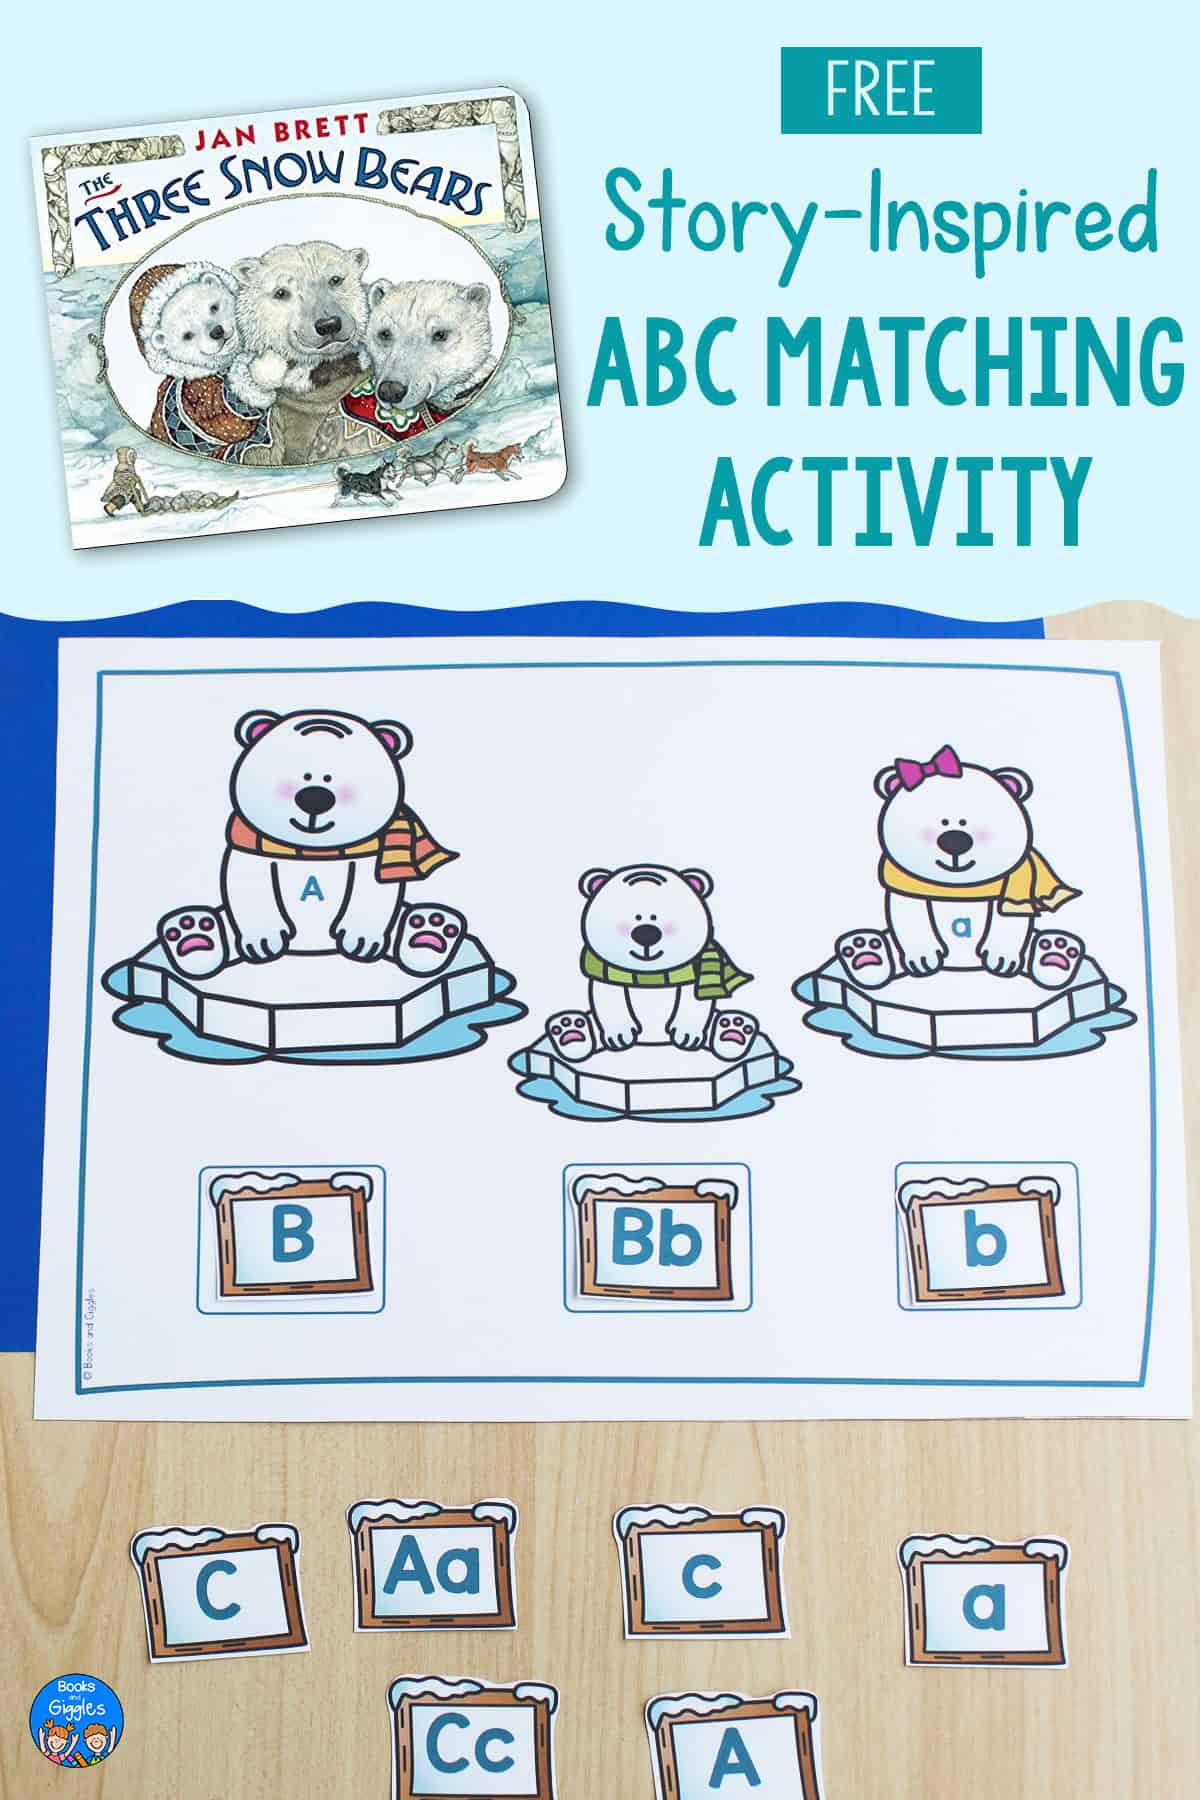 Uppercase Lowercase Letter Match Activity Inspired by The Three Snow Bears